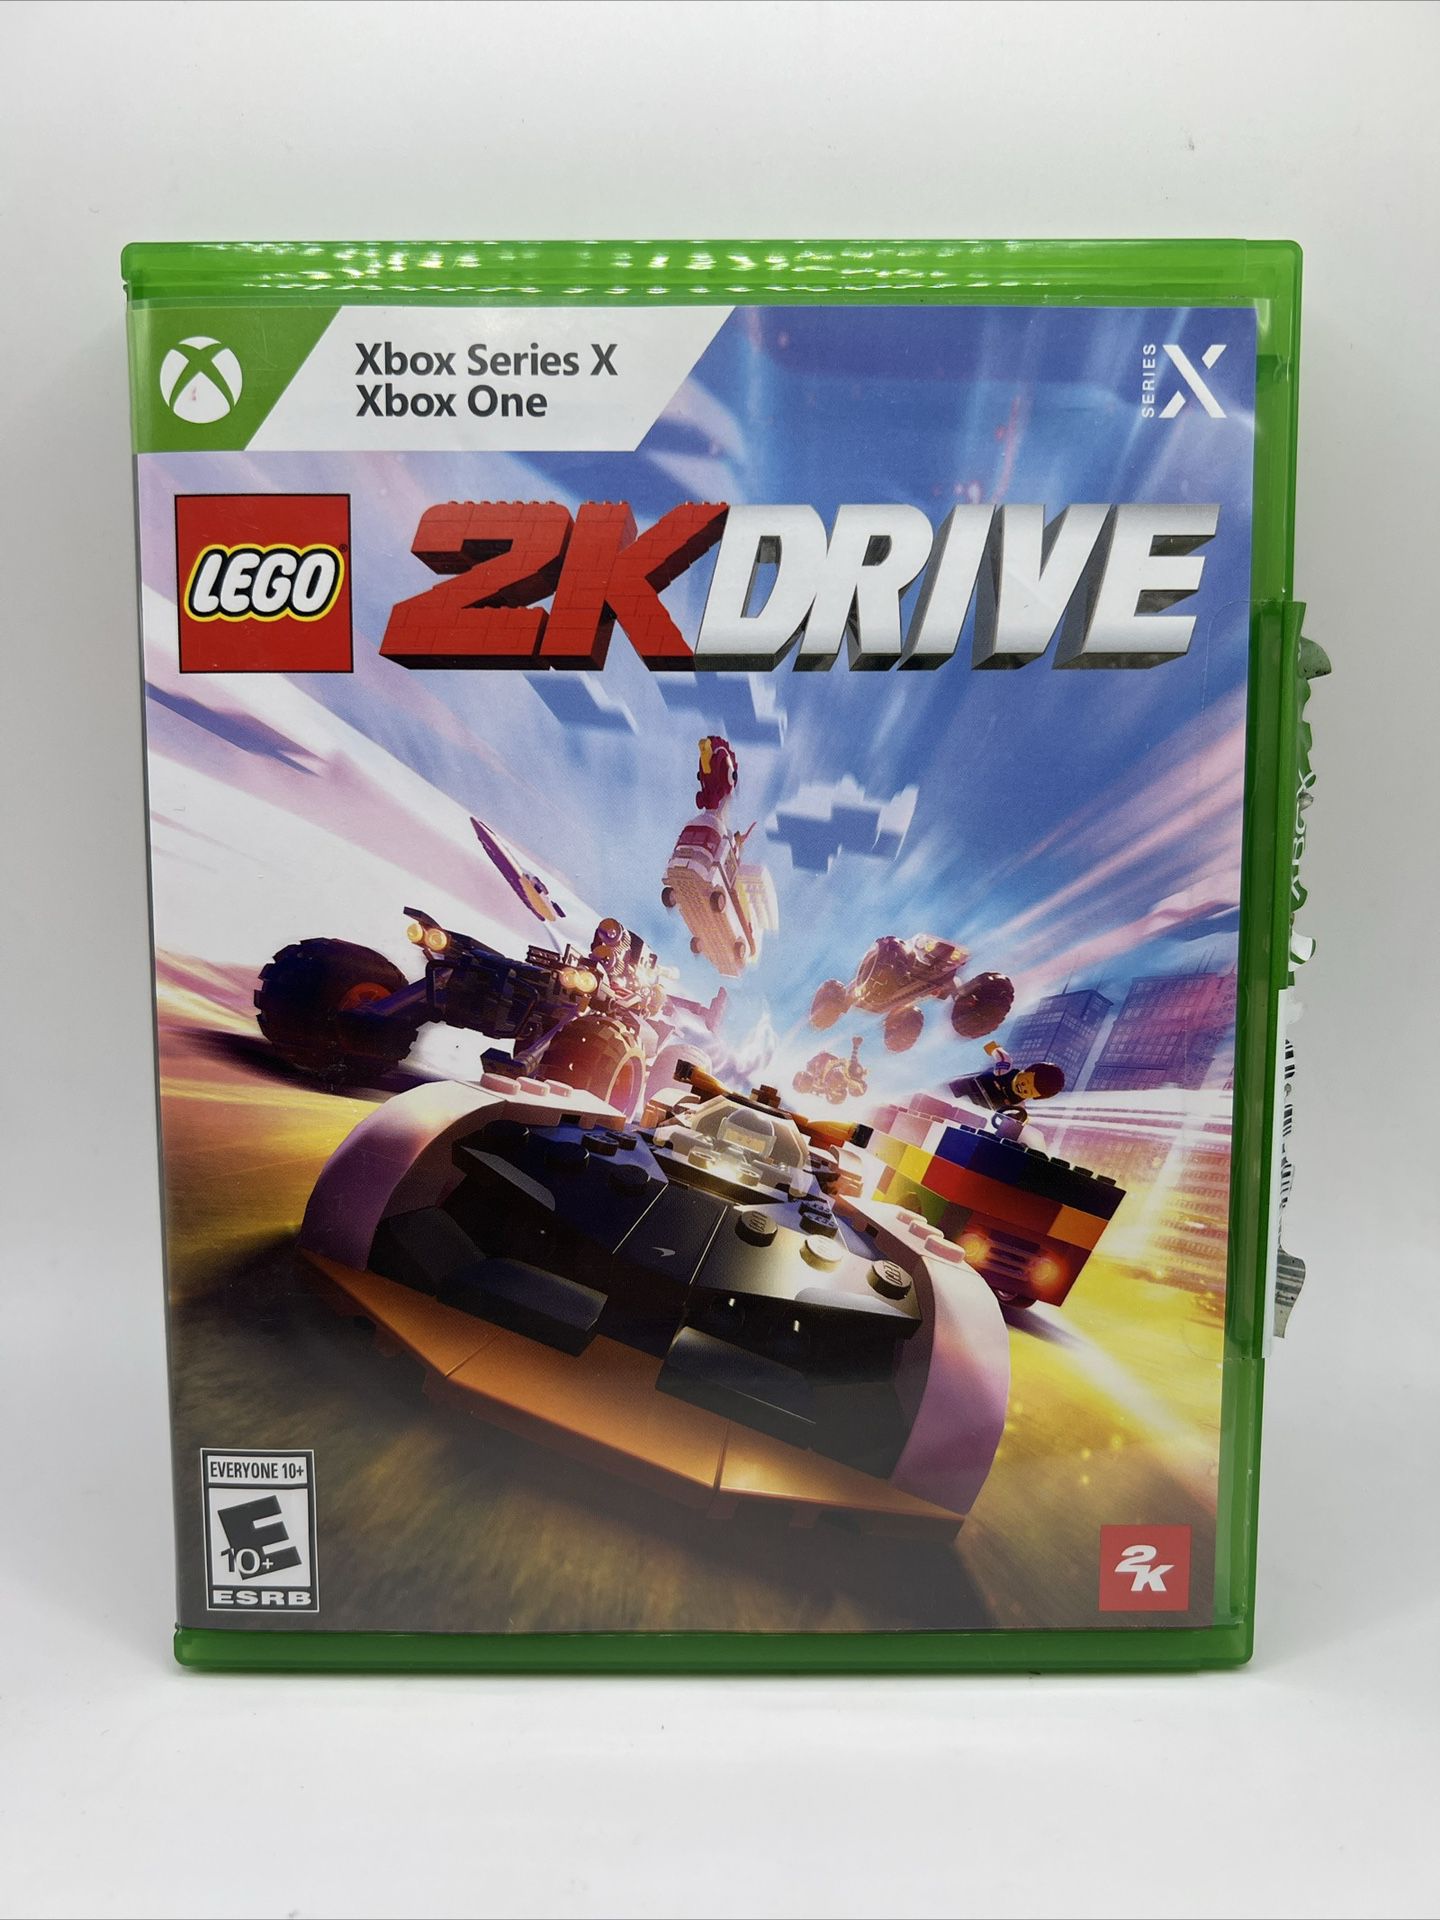 LEGO 2K Drive Standard Edition - Xbox Series X and Xbox One Used Adult Owned